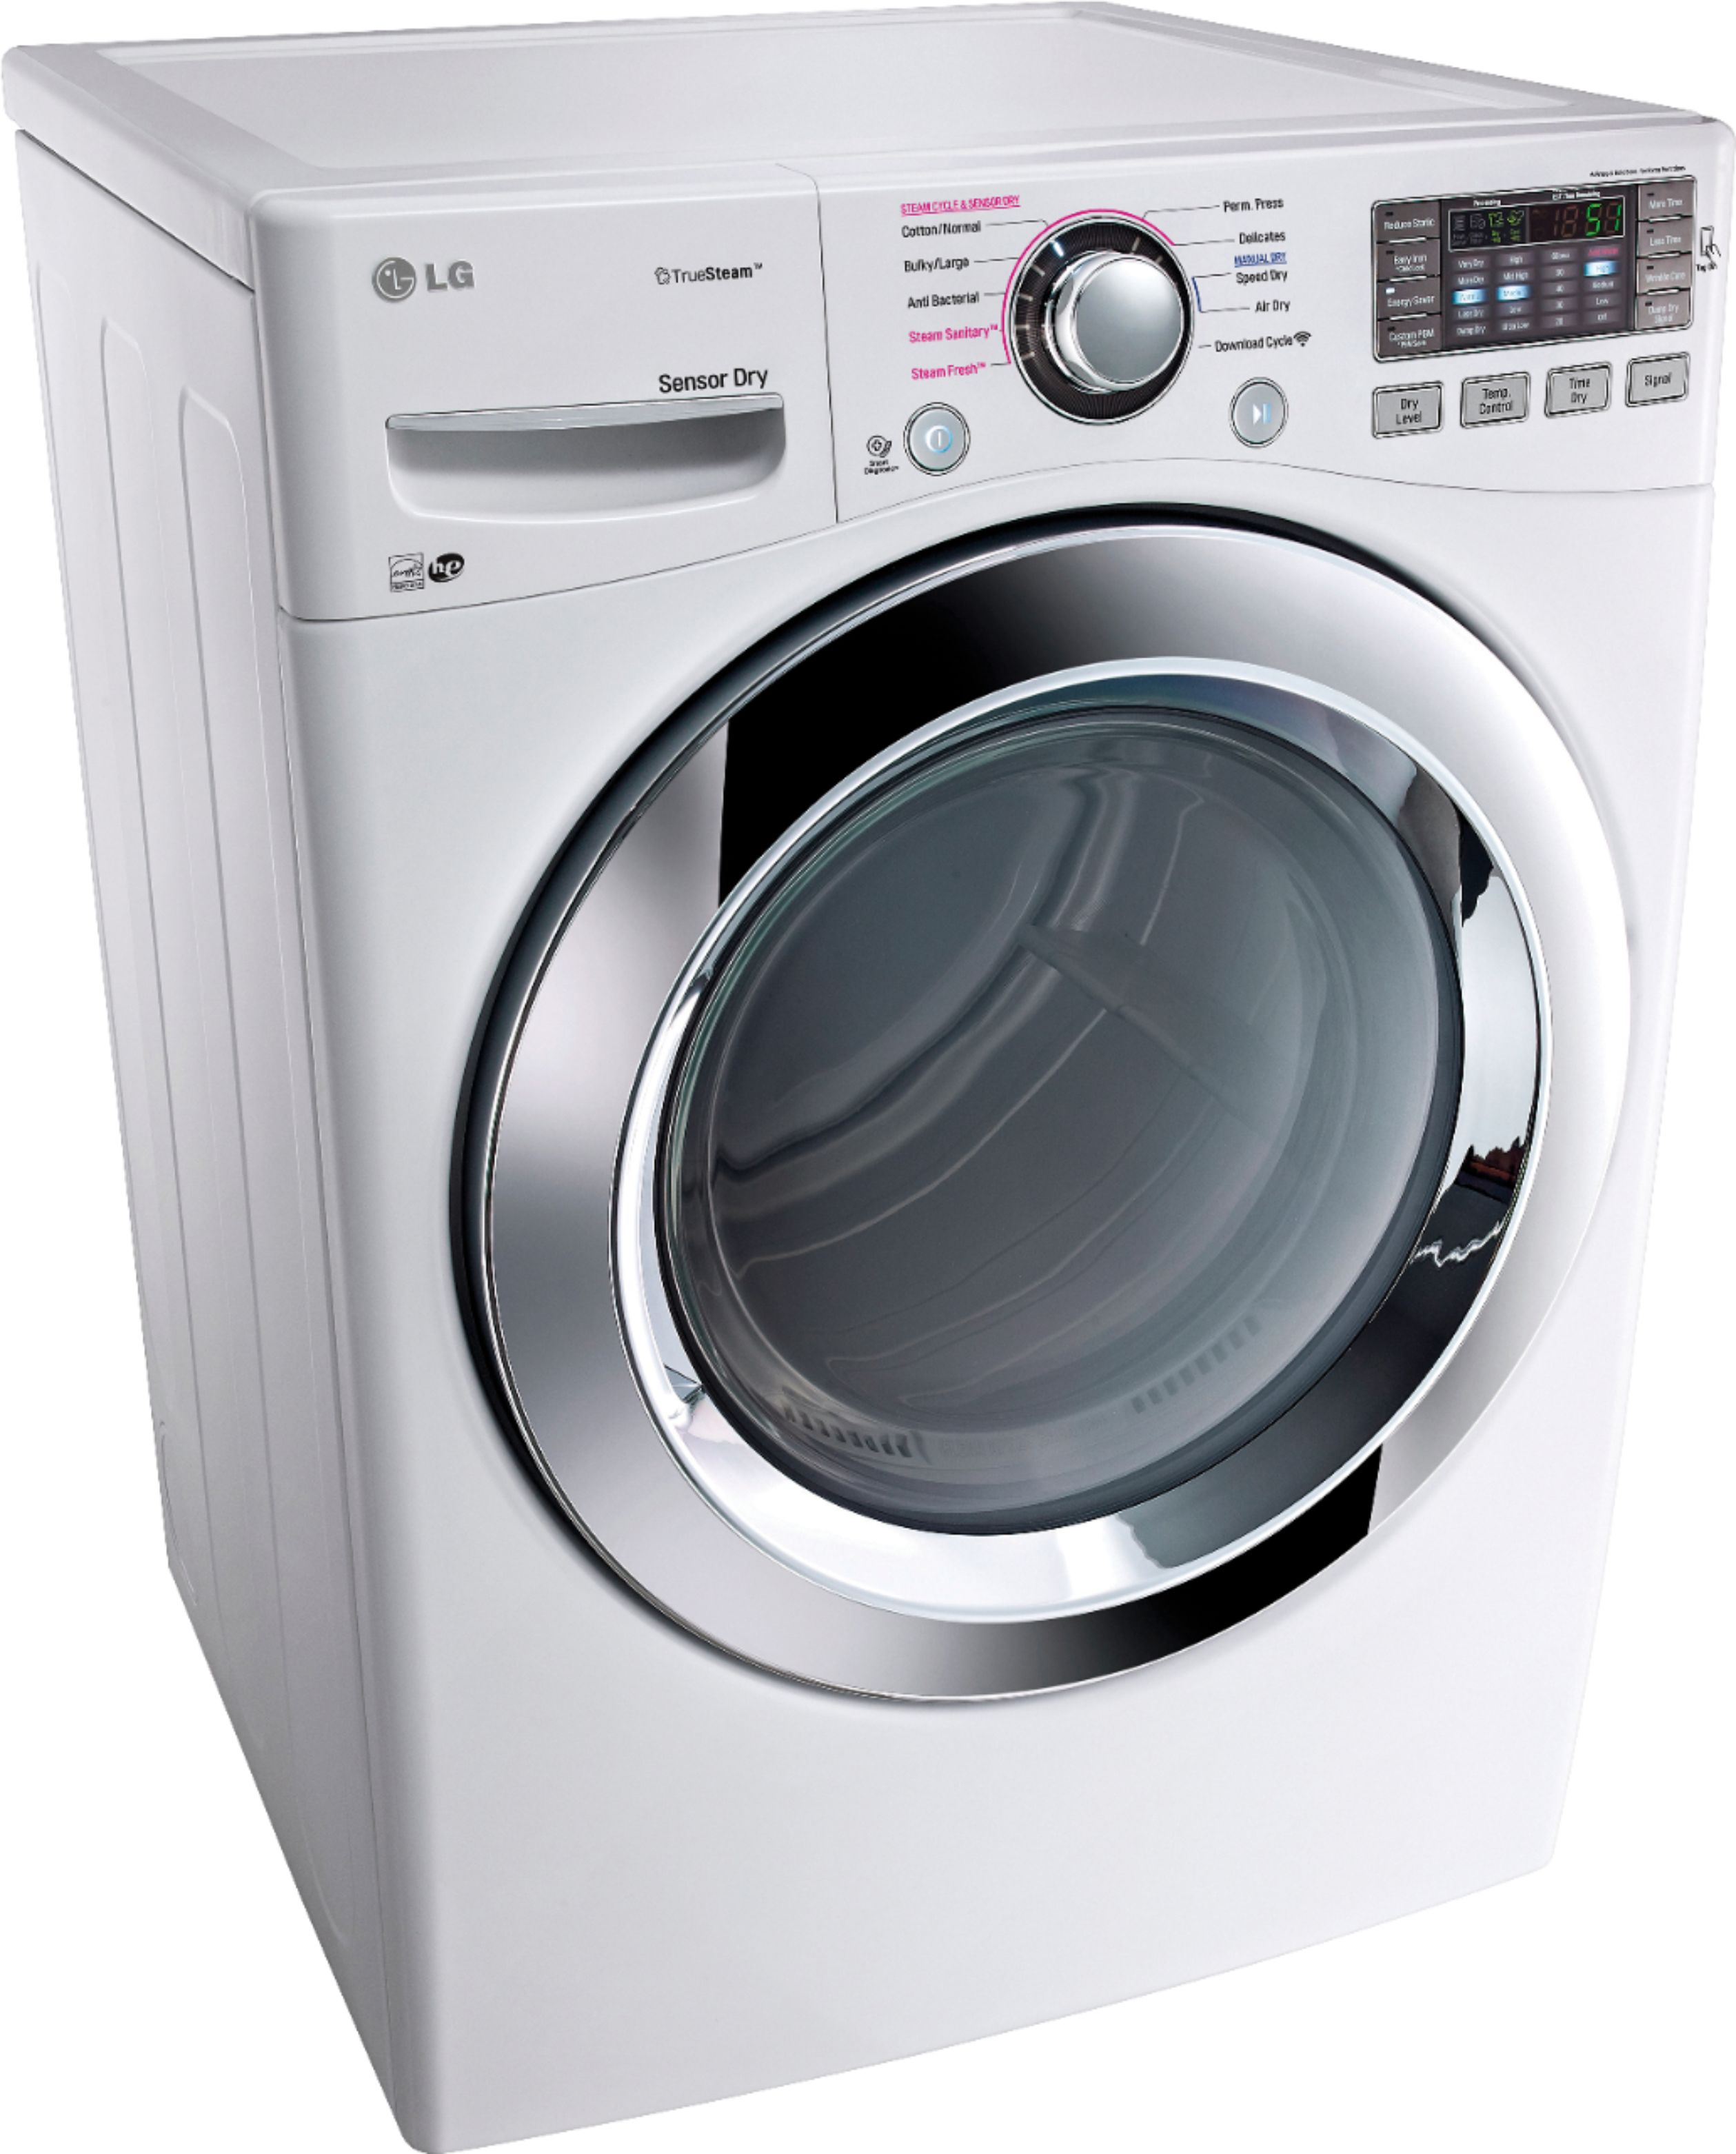 LG SteamDryer 7 4 Cu Ft 10 Cycle Steam Gas Dryer White at